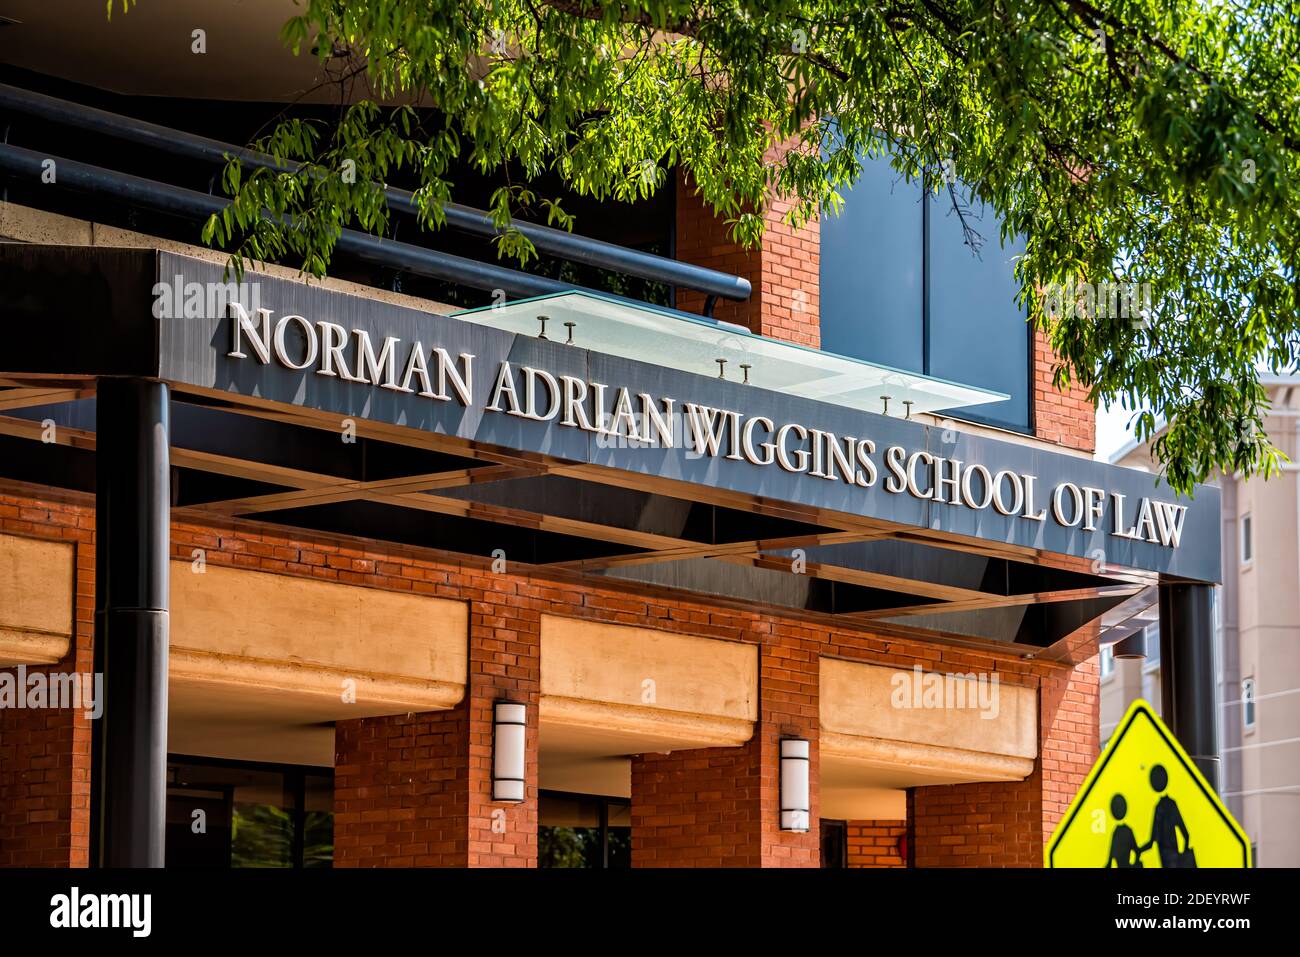 Raleigh, USA - May 13, 2018: Downtown North Carolina city with modern building for office building of Norman Adrian Wiggins school of lawn Campbell Un Stock Photo